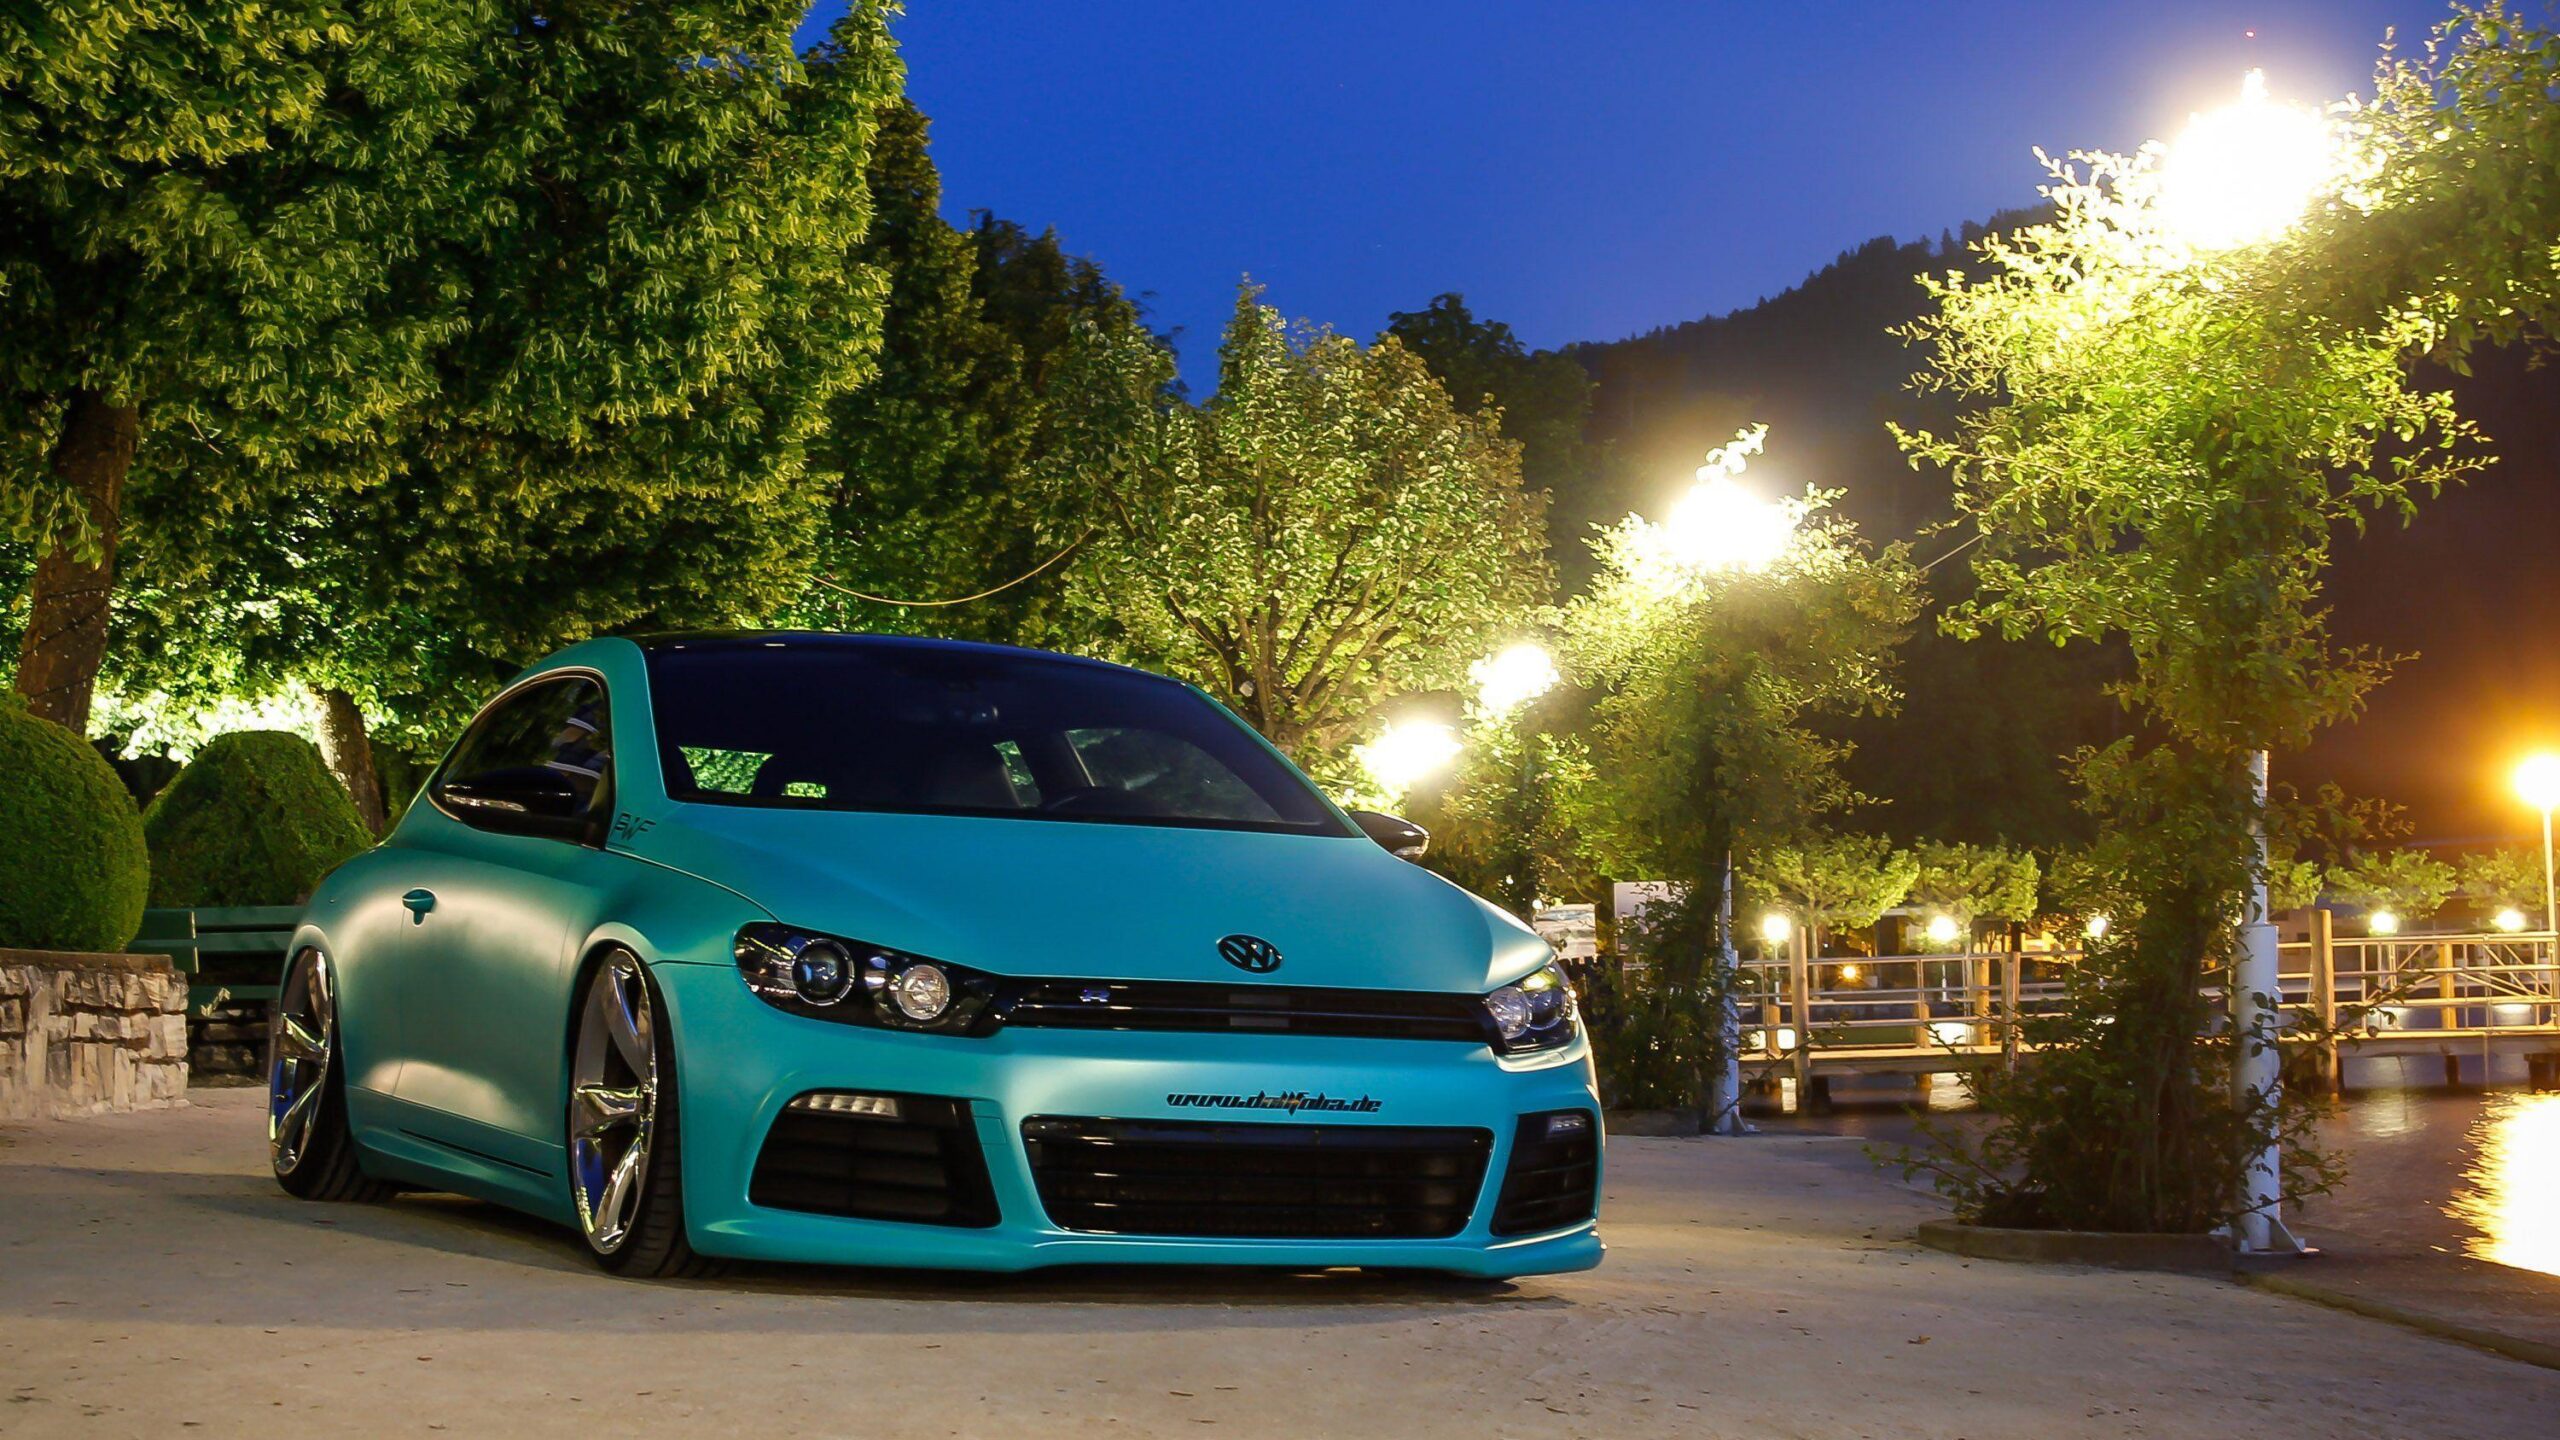 Scirocco wallpapers